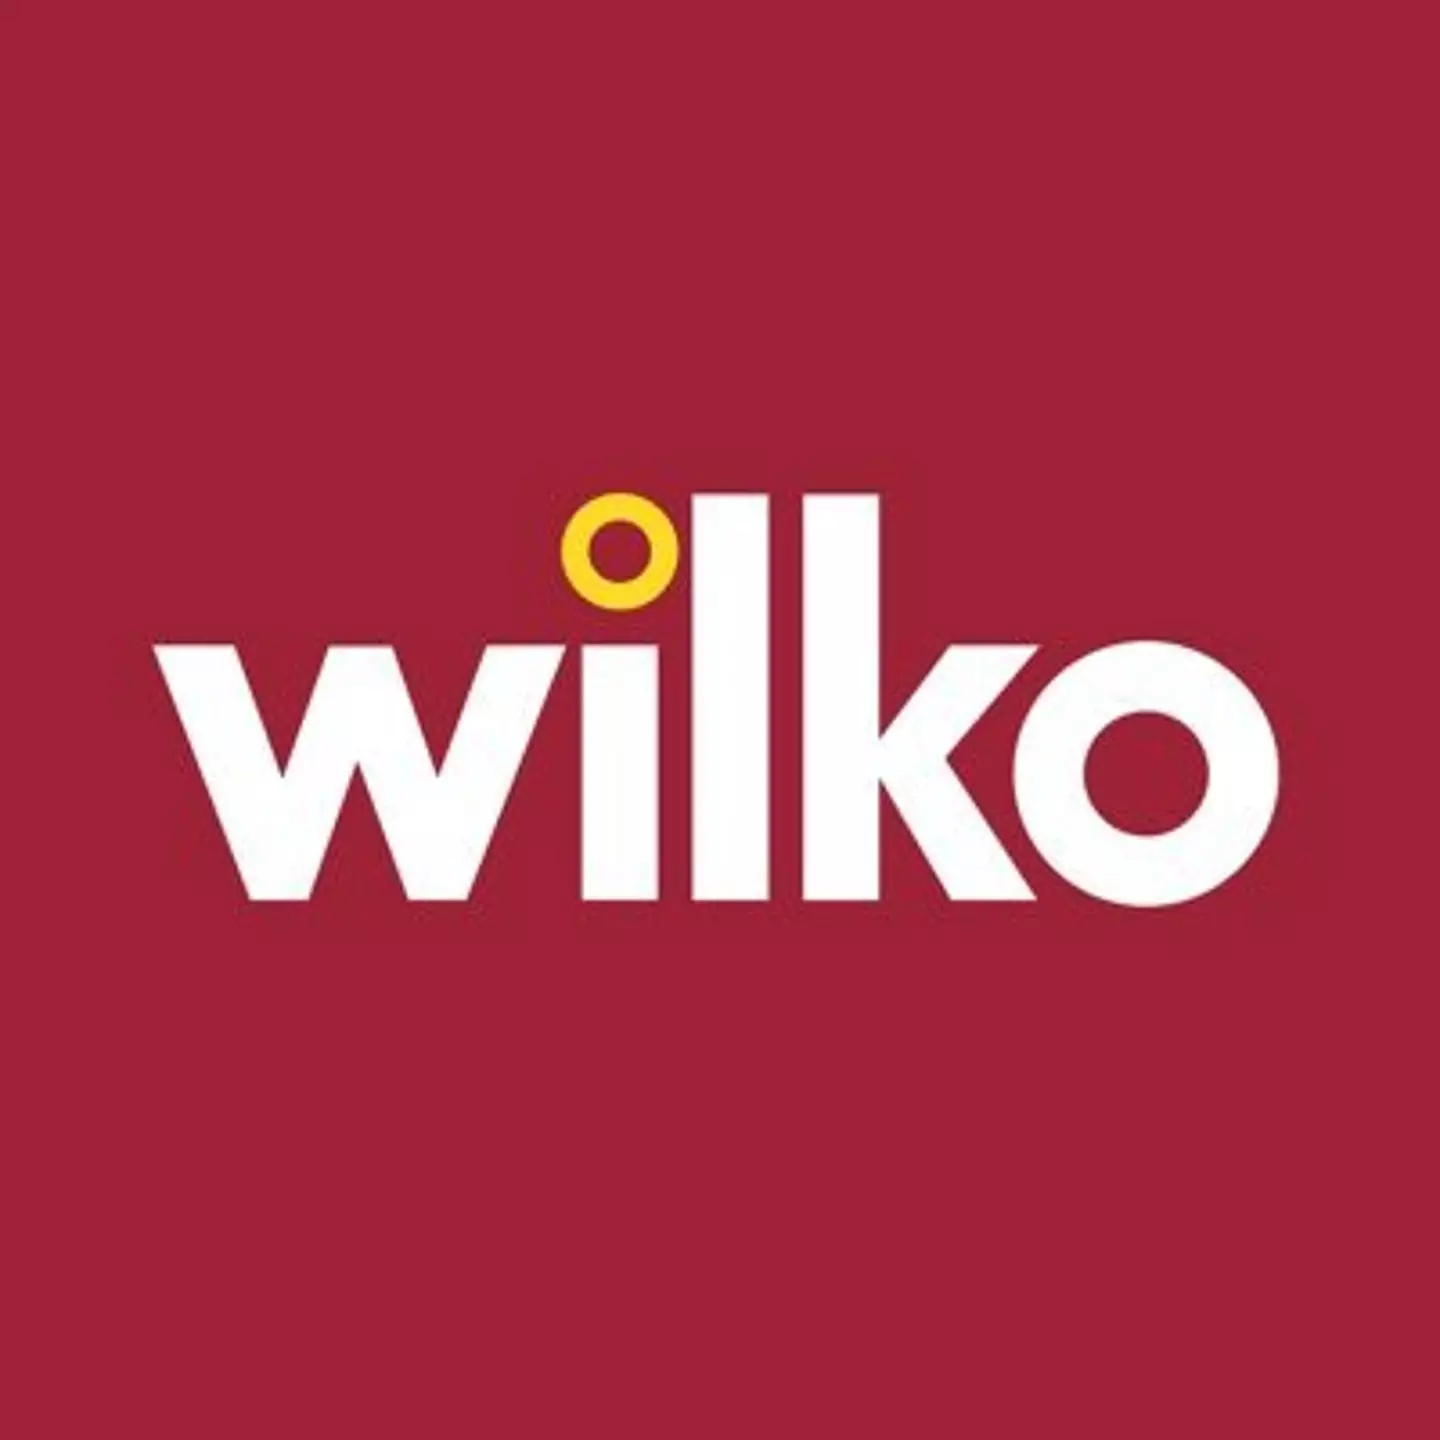 Wilko said it has filed a notice of intent to appoint administrators, putting around 12,000 jobs at risk.